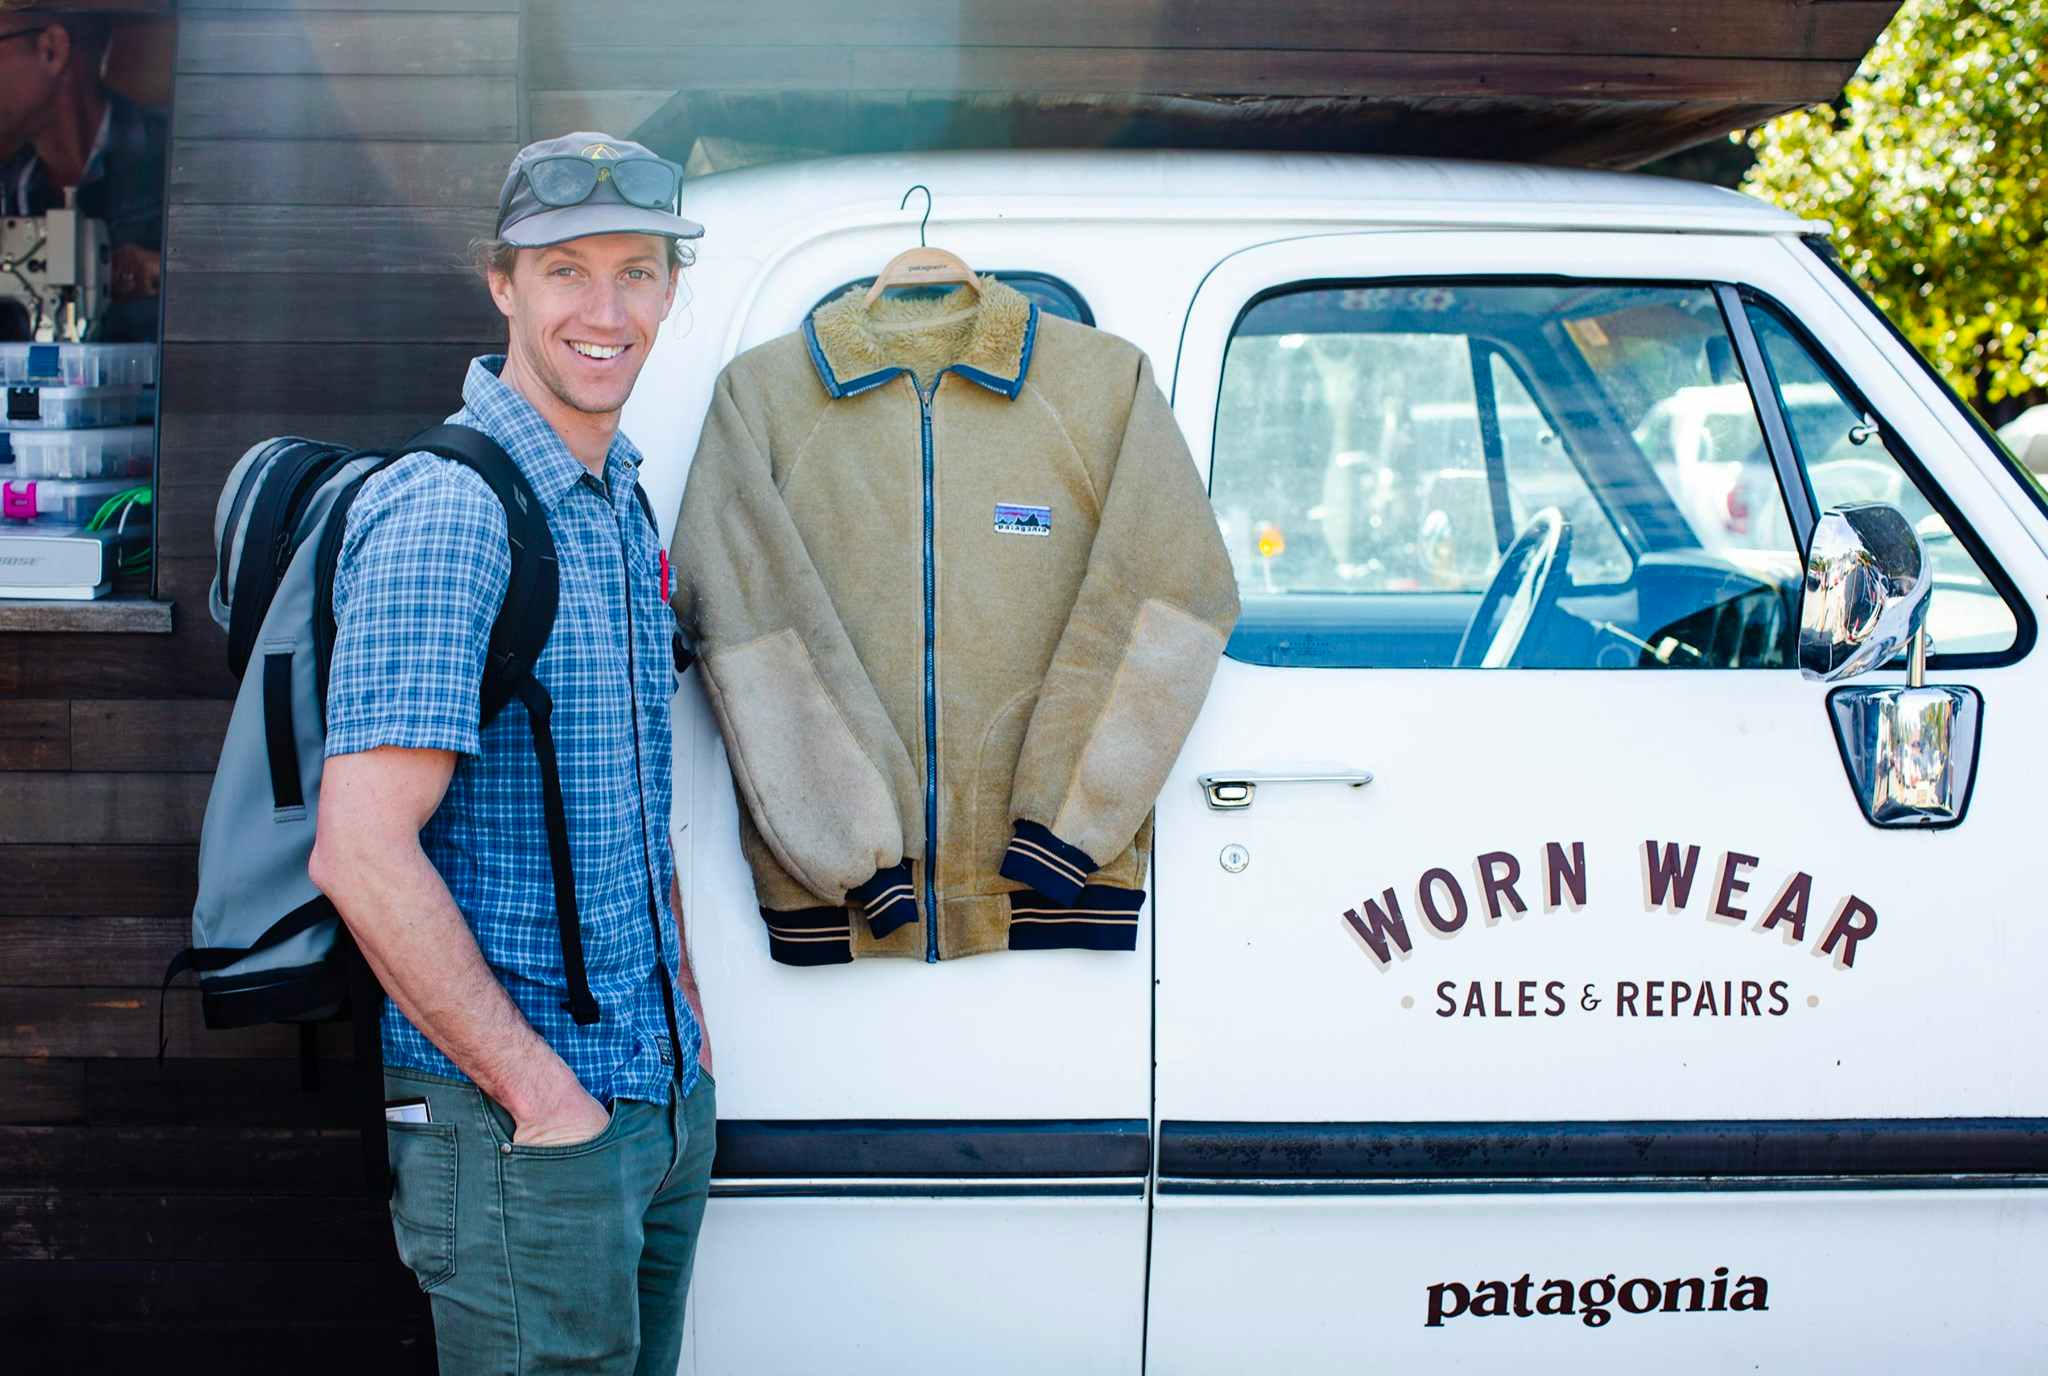 A man standing next to a Patagonia jacket hanging off of the Patagonia Worn Wear truck.